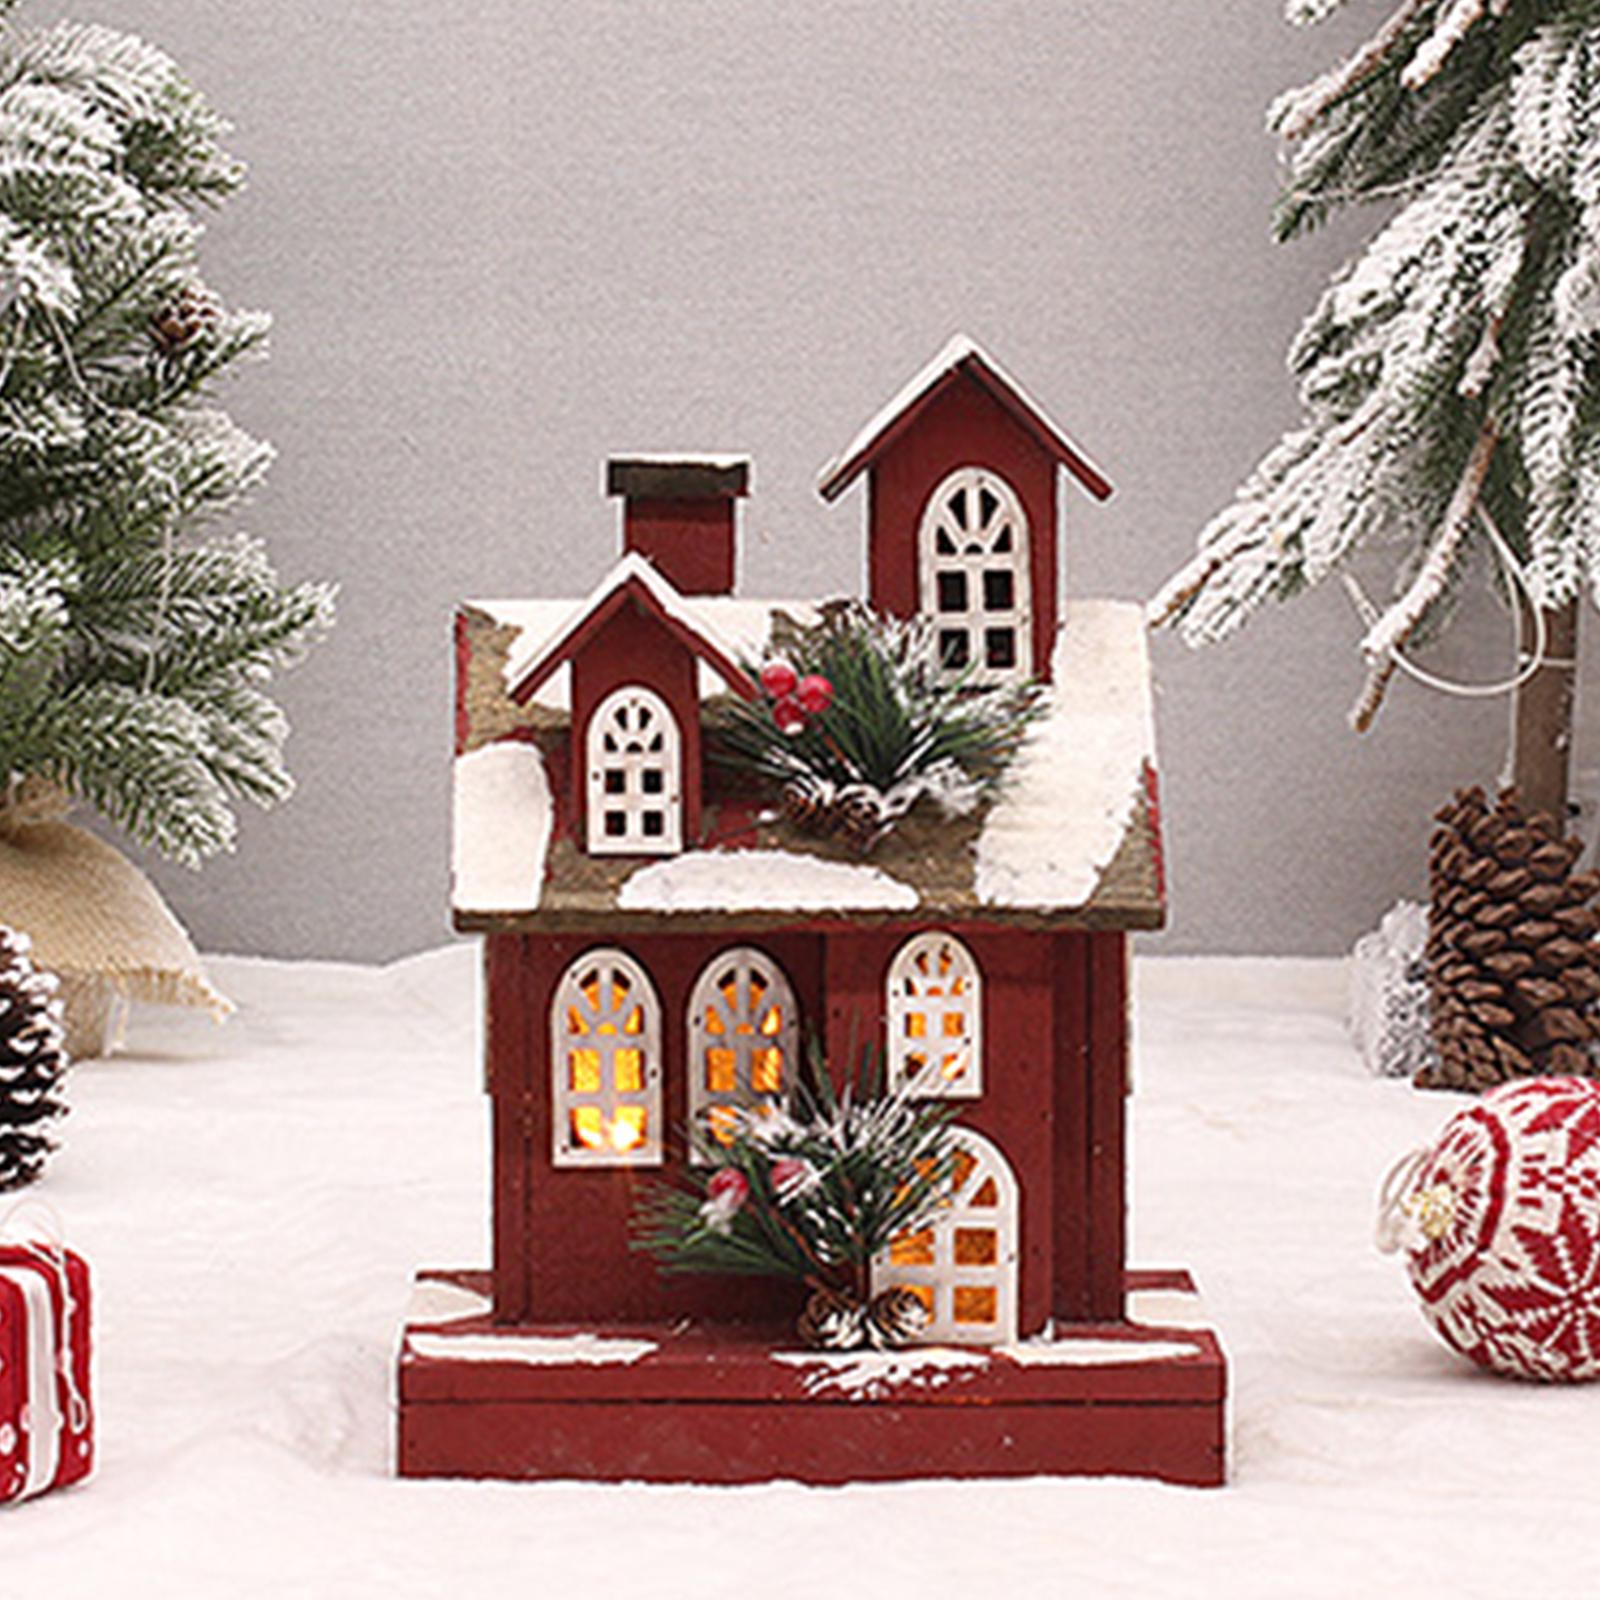 Village House Christmas LED Lights Buildings Room Battery Operated Figurines Style B 22x14x30cm